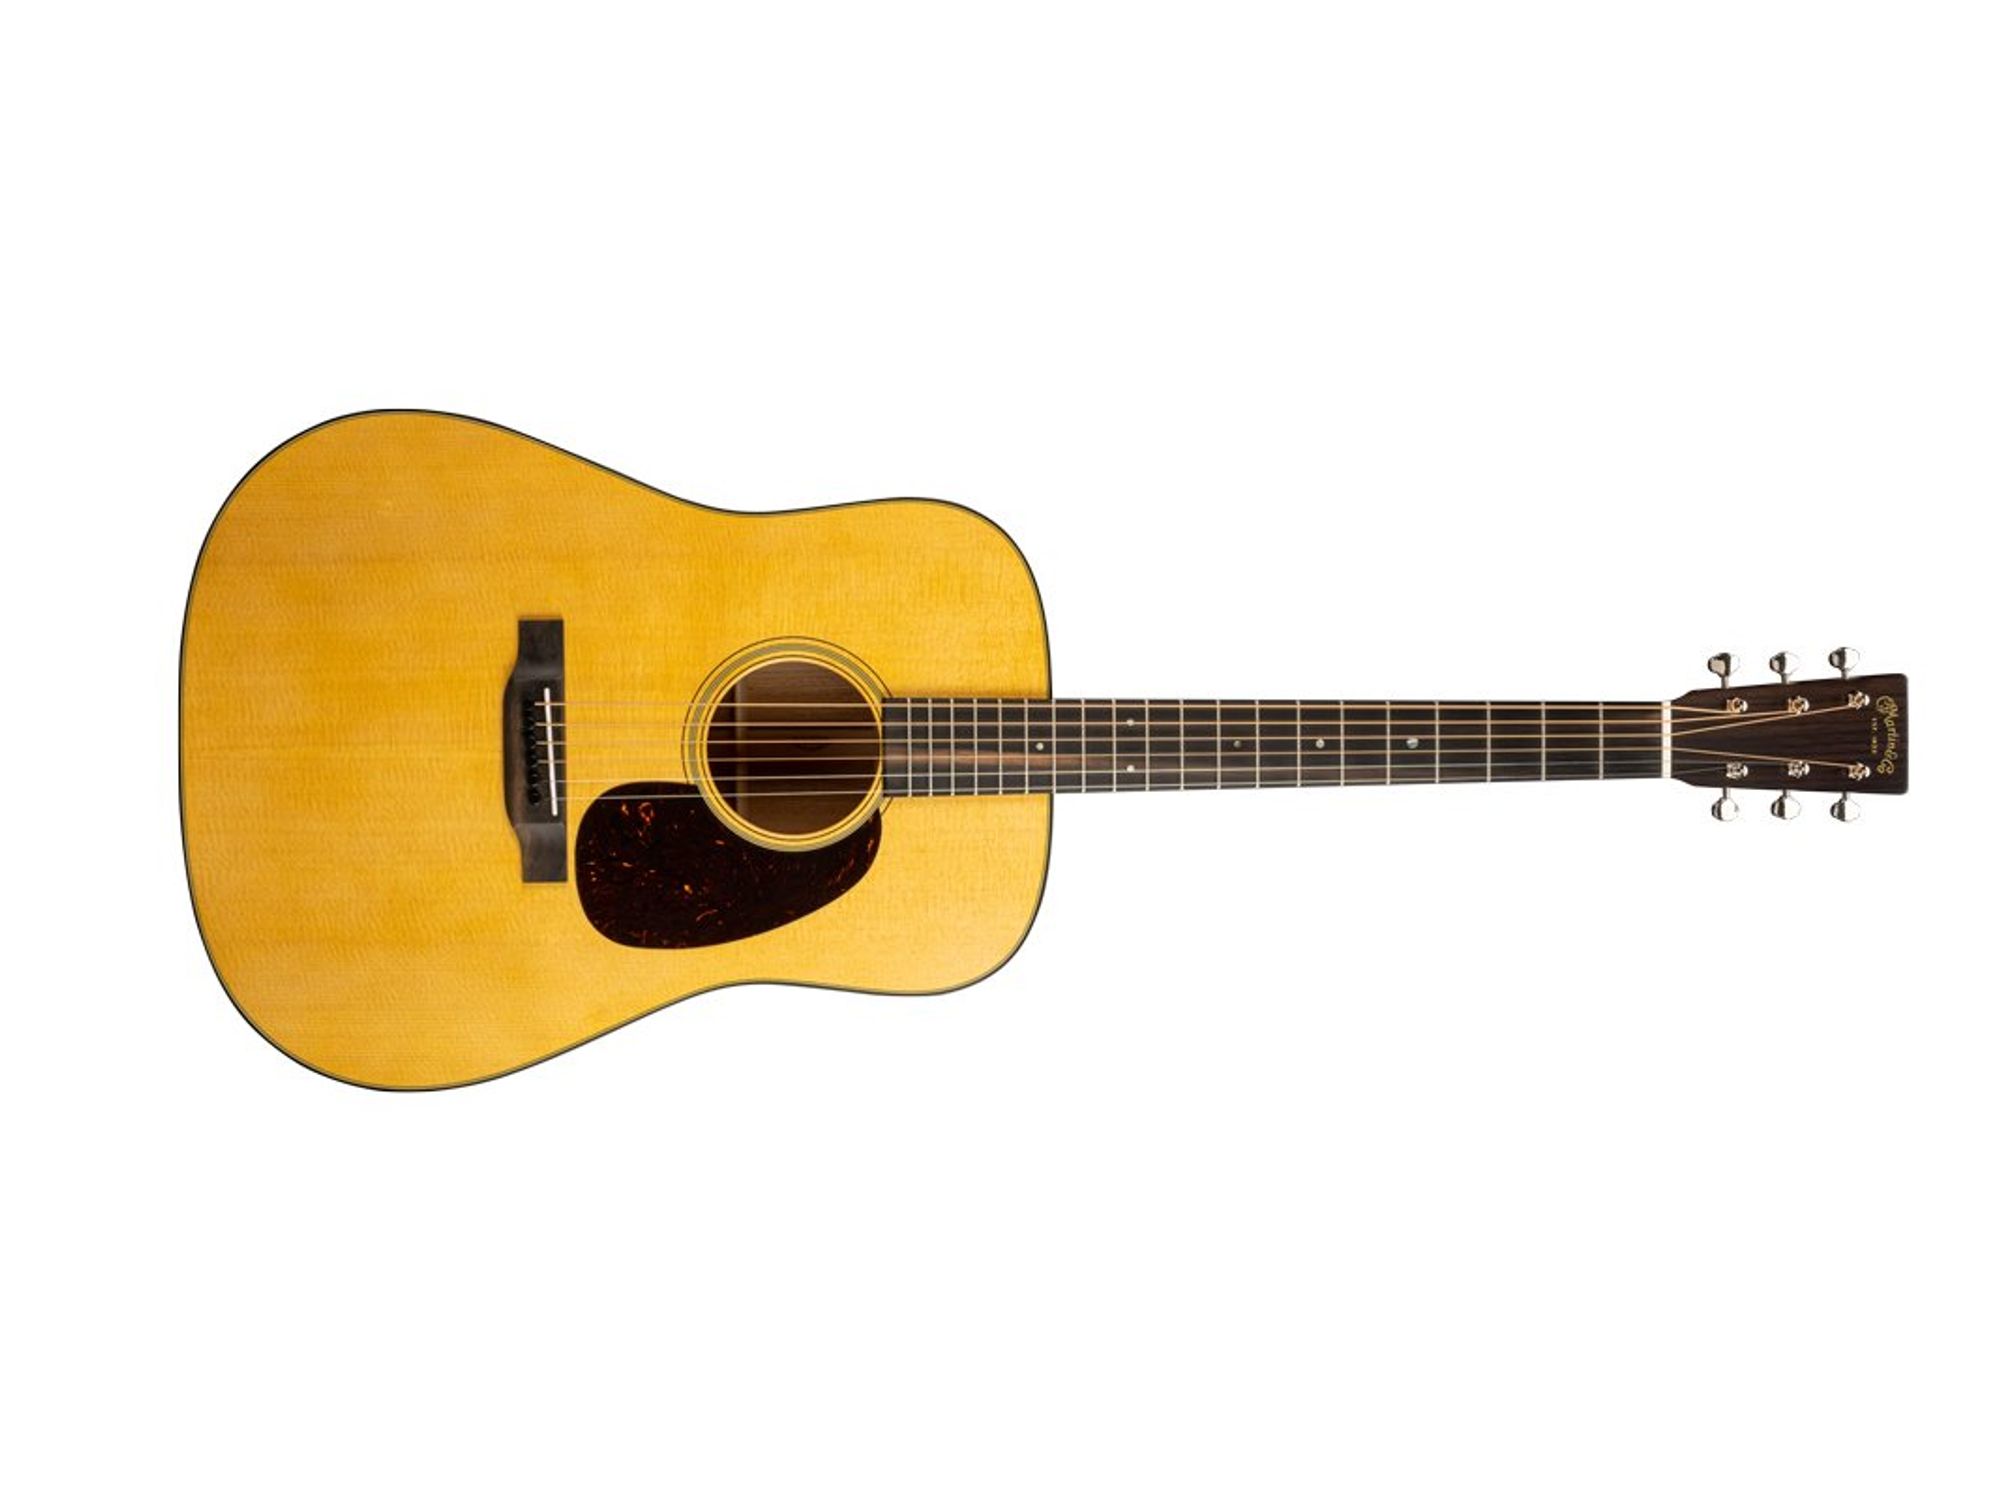 Martin Guitar Debuts Aged Authentics, Street Legend Models and Satin-Finished Models